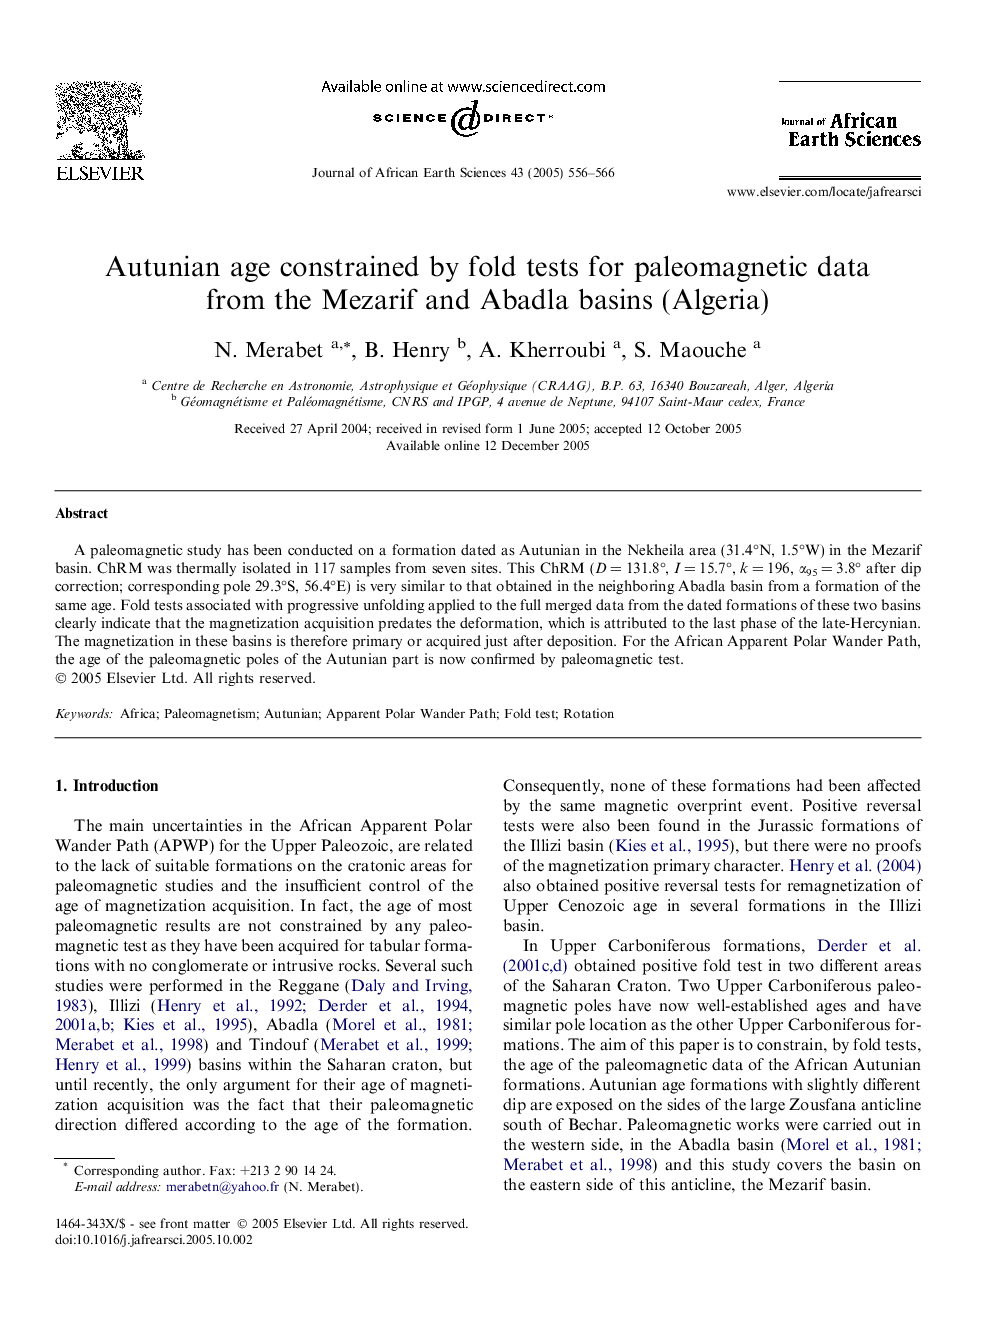 Autunian age constrained by fold tests for paleomagnetic data from the Mezarif and Abadla basins (Algeria)